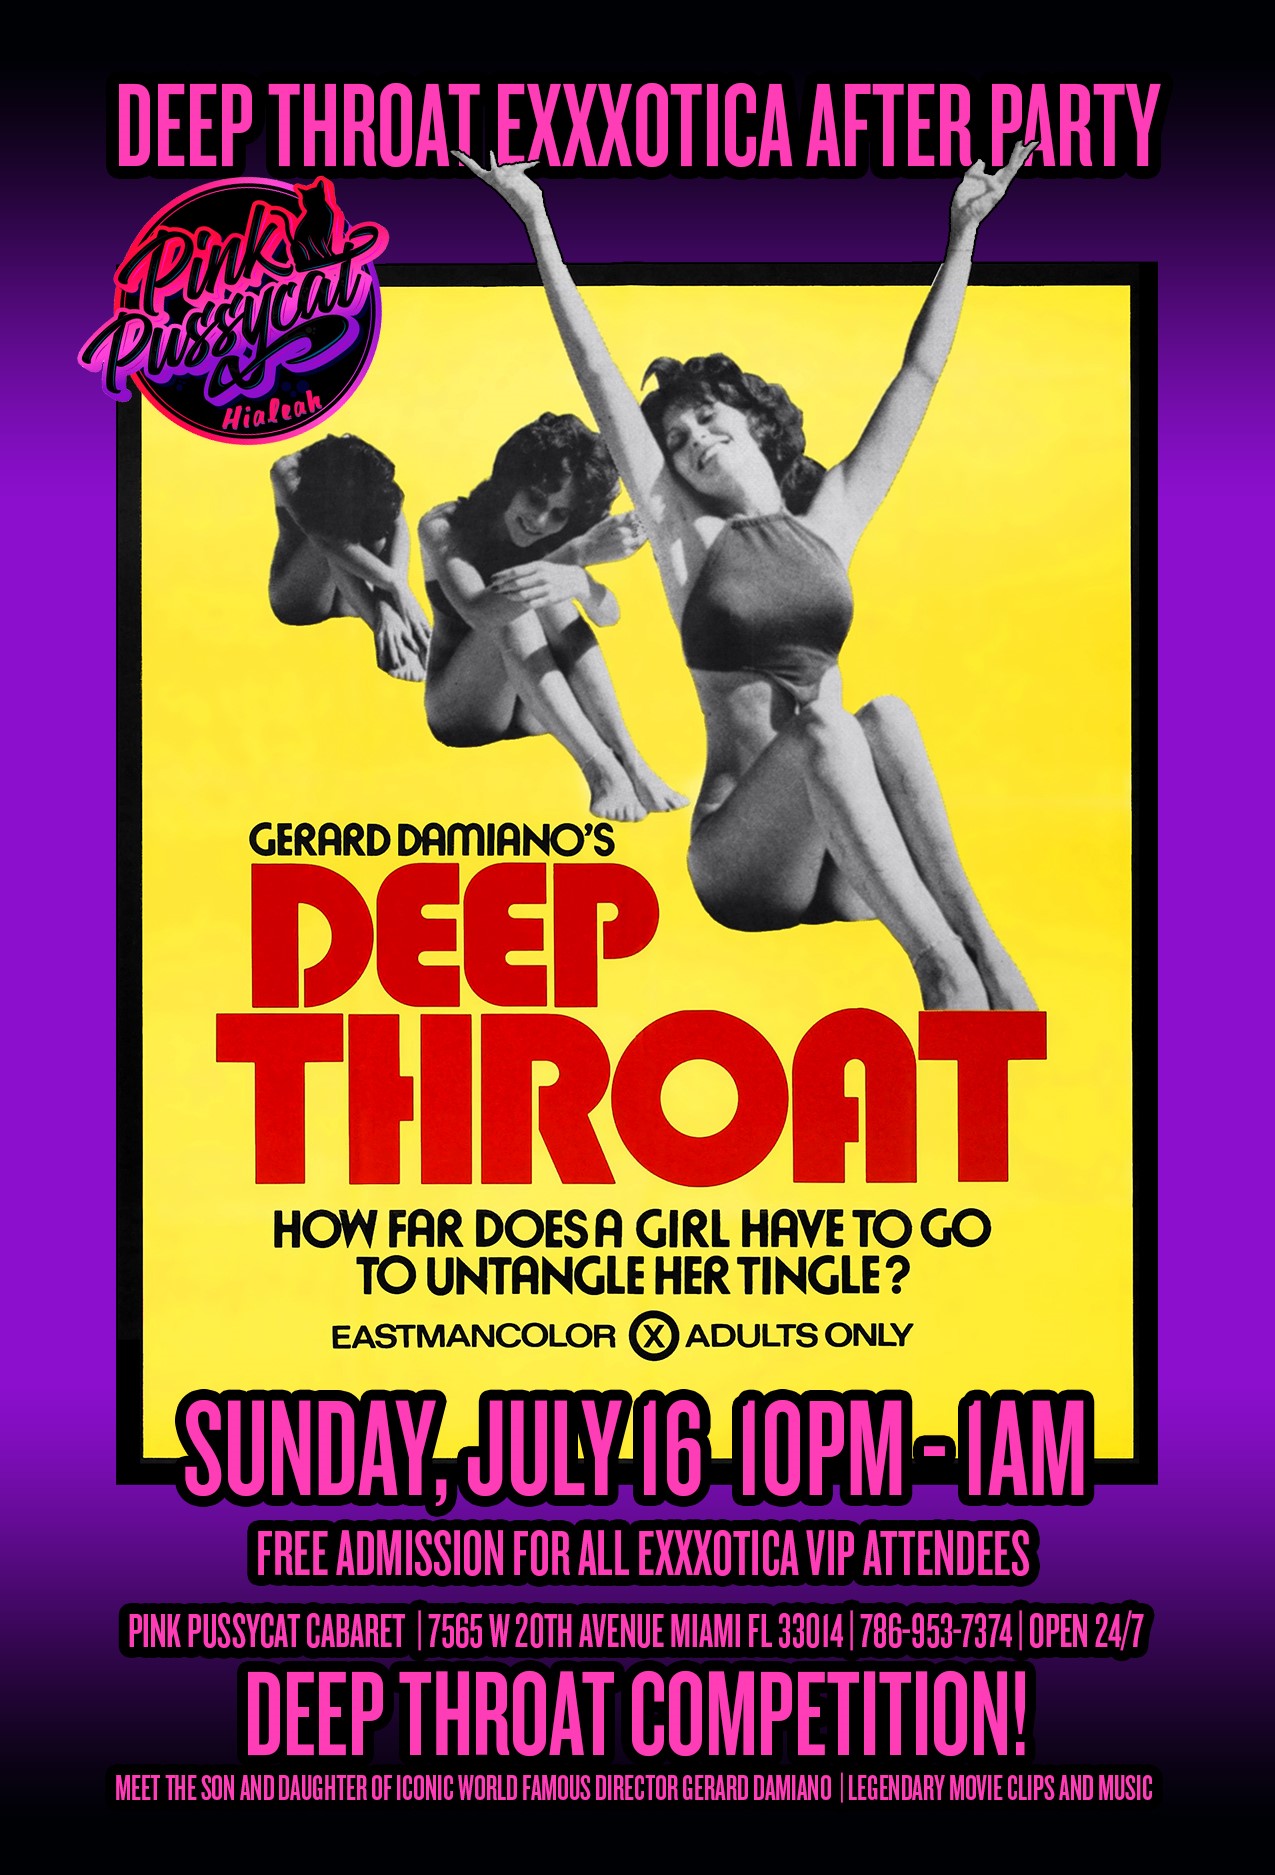 Iconic Film “Deep Throat” Returns Home to Miami as Son & Daughter of Gerard Damiano Sr. Commemorate the 50th Anniversary at Exxxotica Miami & The Pink Pussycat After Party this Weekend                     